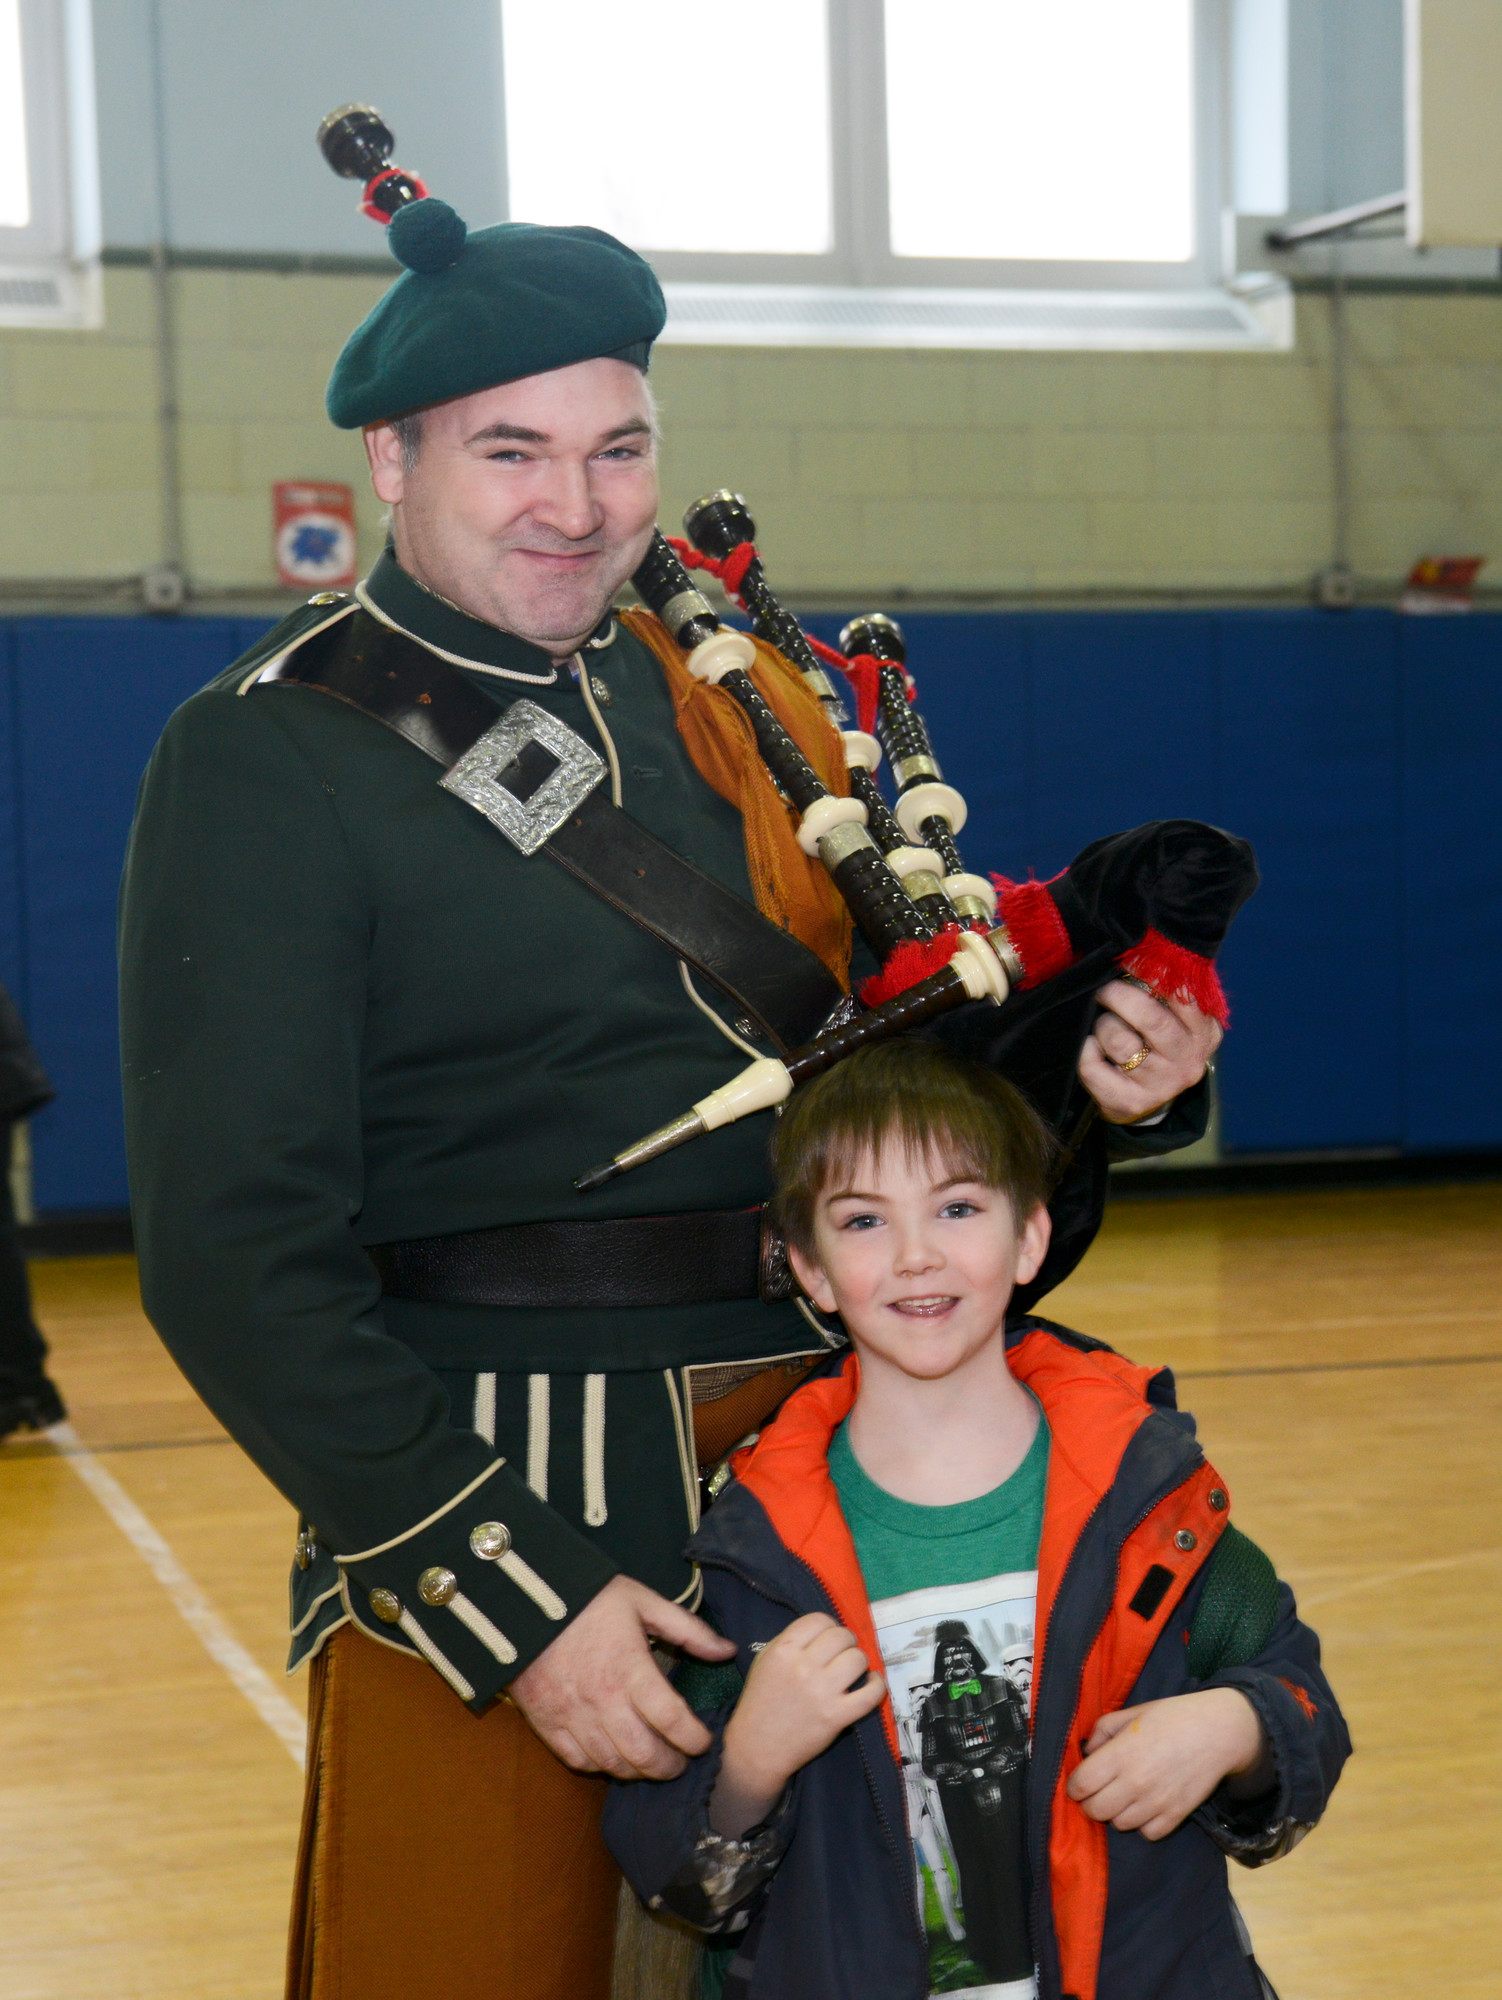 Bagpiper Joe Beyrer and son James, age 6, at School 6 in Oceanside.